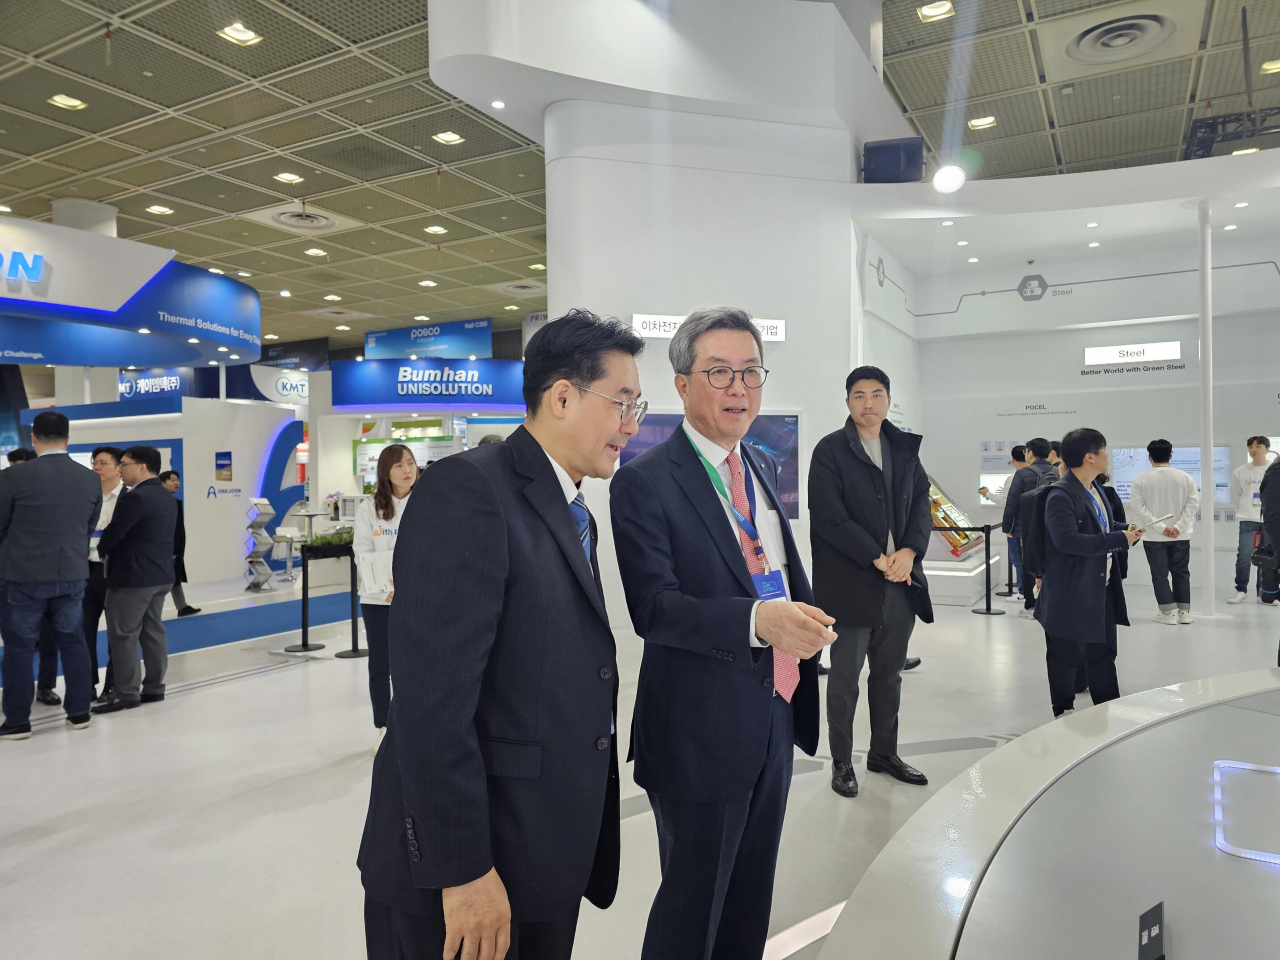 Kim Jun-hyung, head of eco-friendly future materials at Posco Holdings, is looking at the booth of Posco Holdings in the battery exhibition held on Wednesday. (Yonhap)